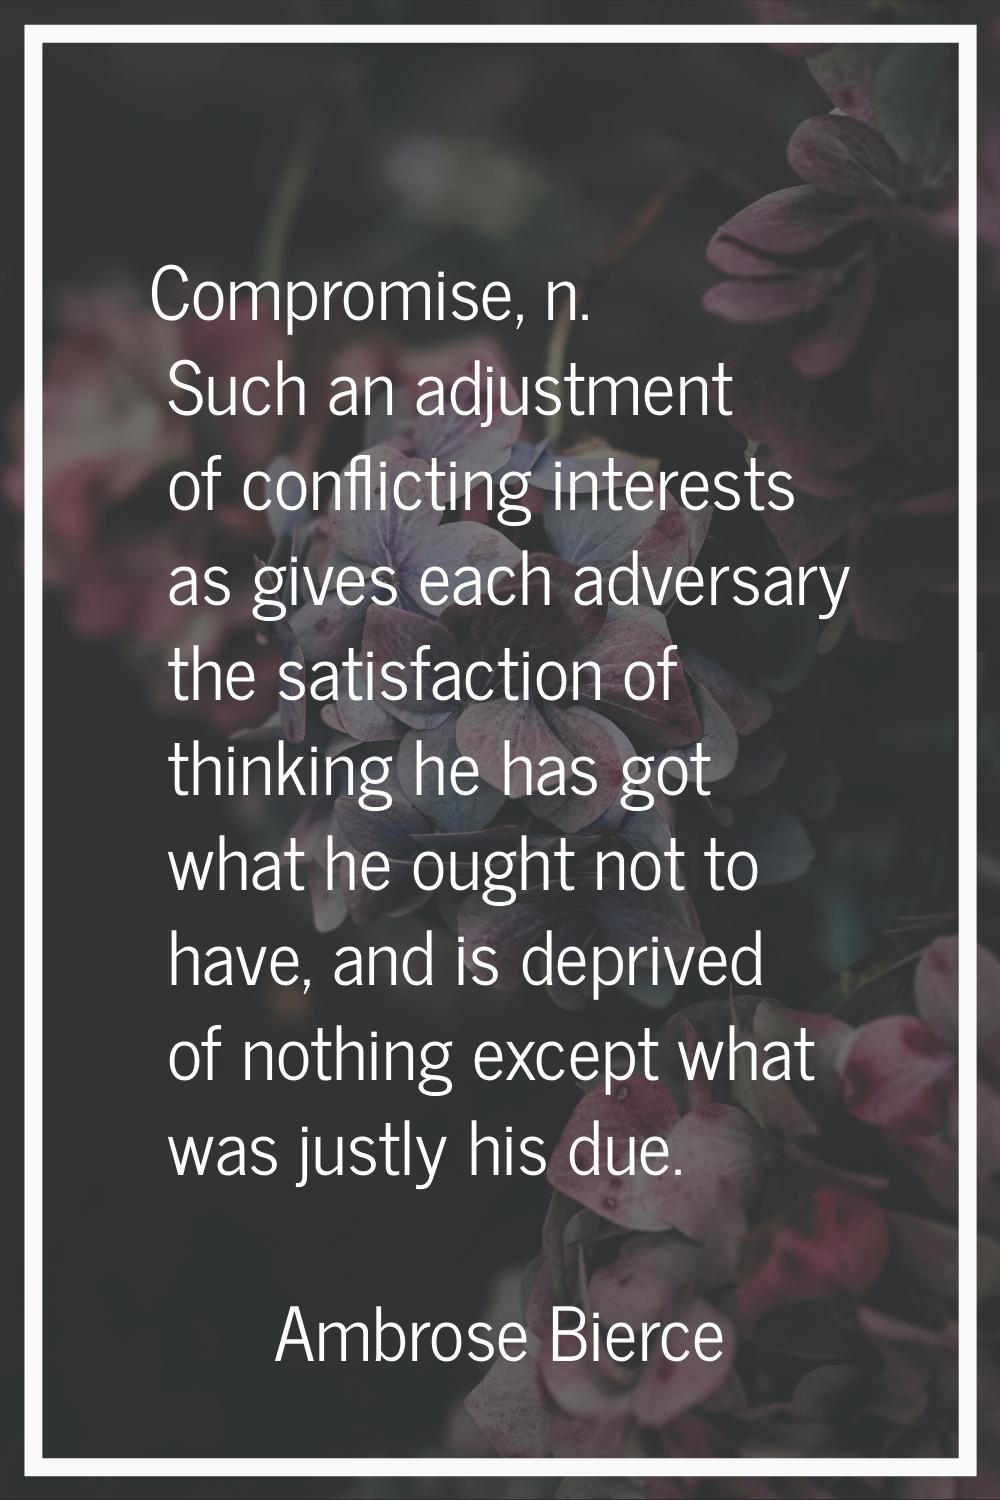 Compromise, n. Such an adjustment of conflicting interests as gives each adversary the satisfaction